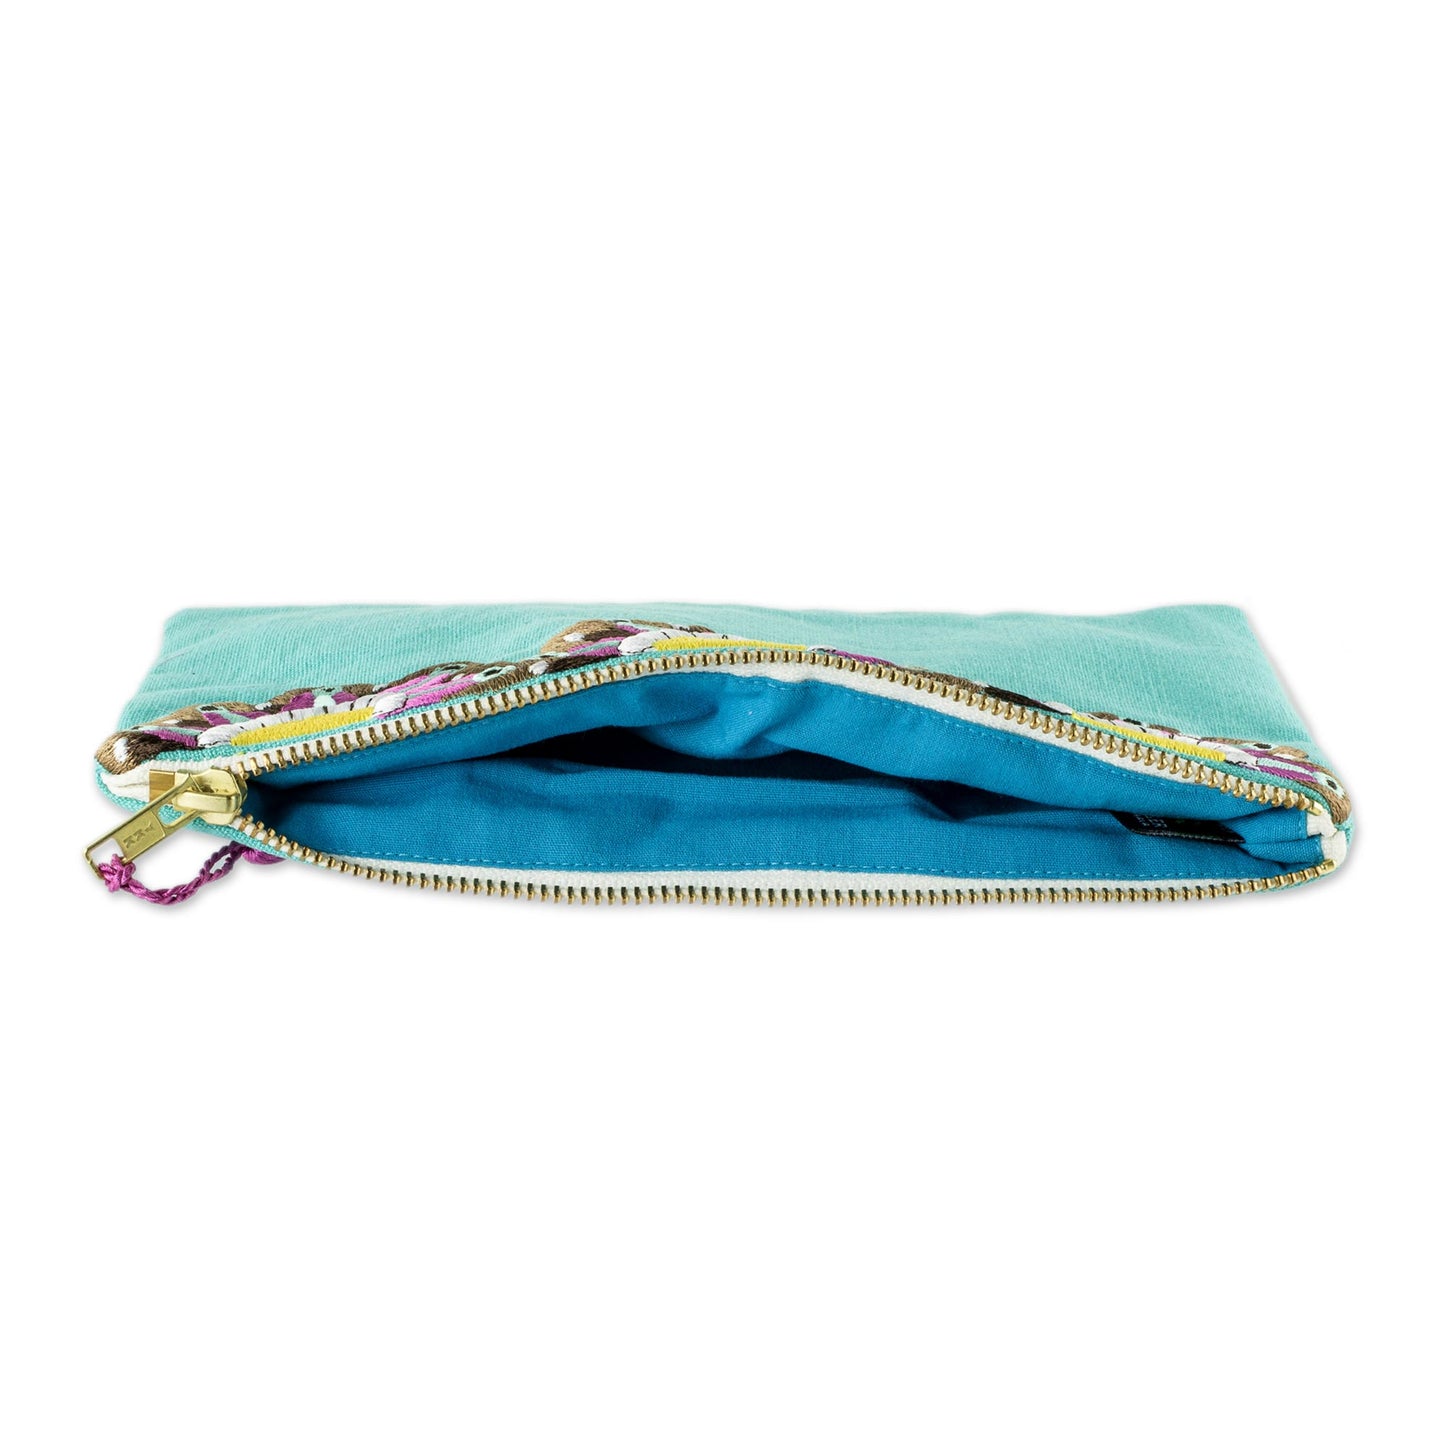 Turquoise Sunbeams Sun Motif Embroidered Turquoise Cotton Cosmetic Bag